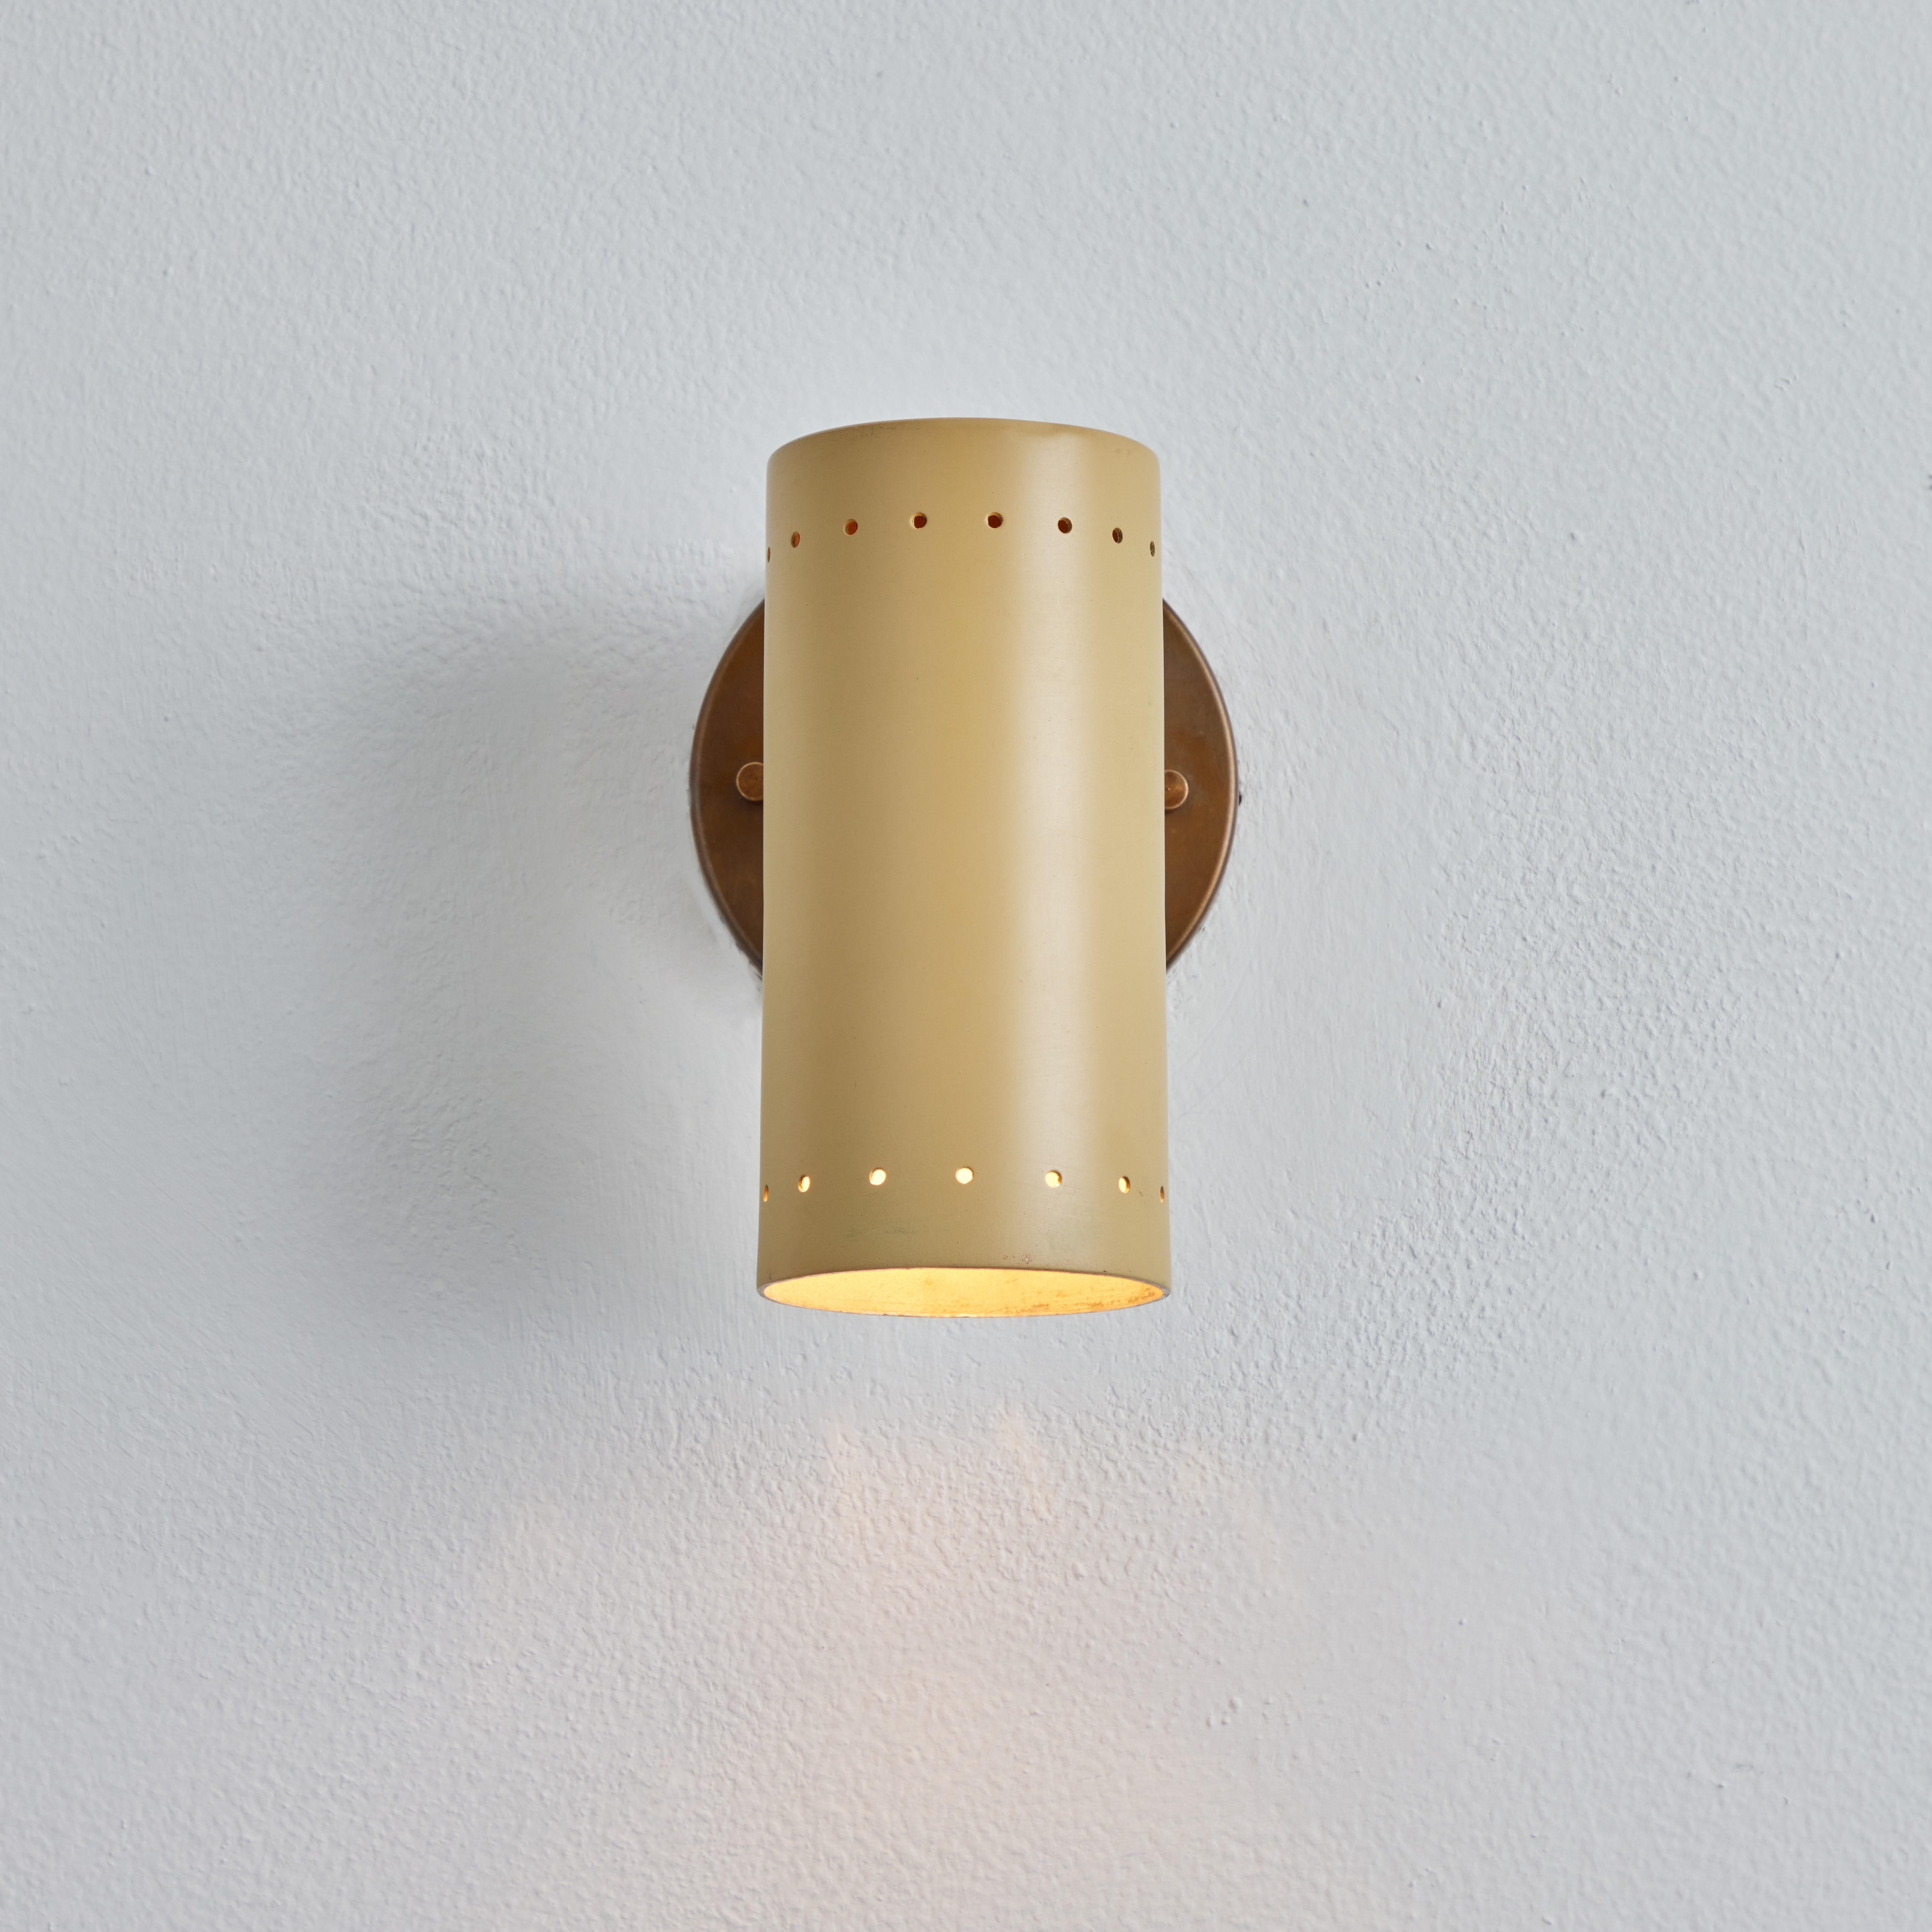 1960s Tito Agnoli beige metal and brass articulating sconce for o-luce. One of his most highly refined minimalist designs. Sleek and functional yet at the same time bright and playful. A highly adjustable wall light, the tubular shade rotates freely